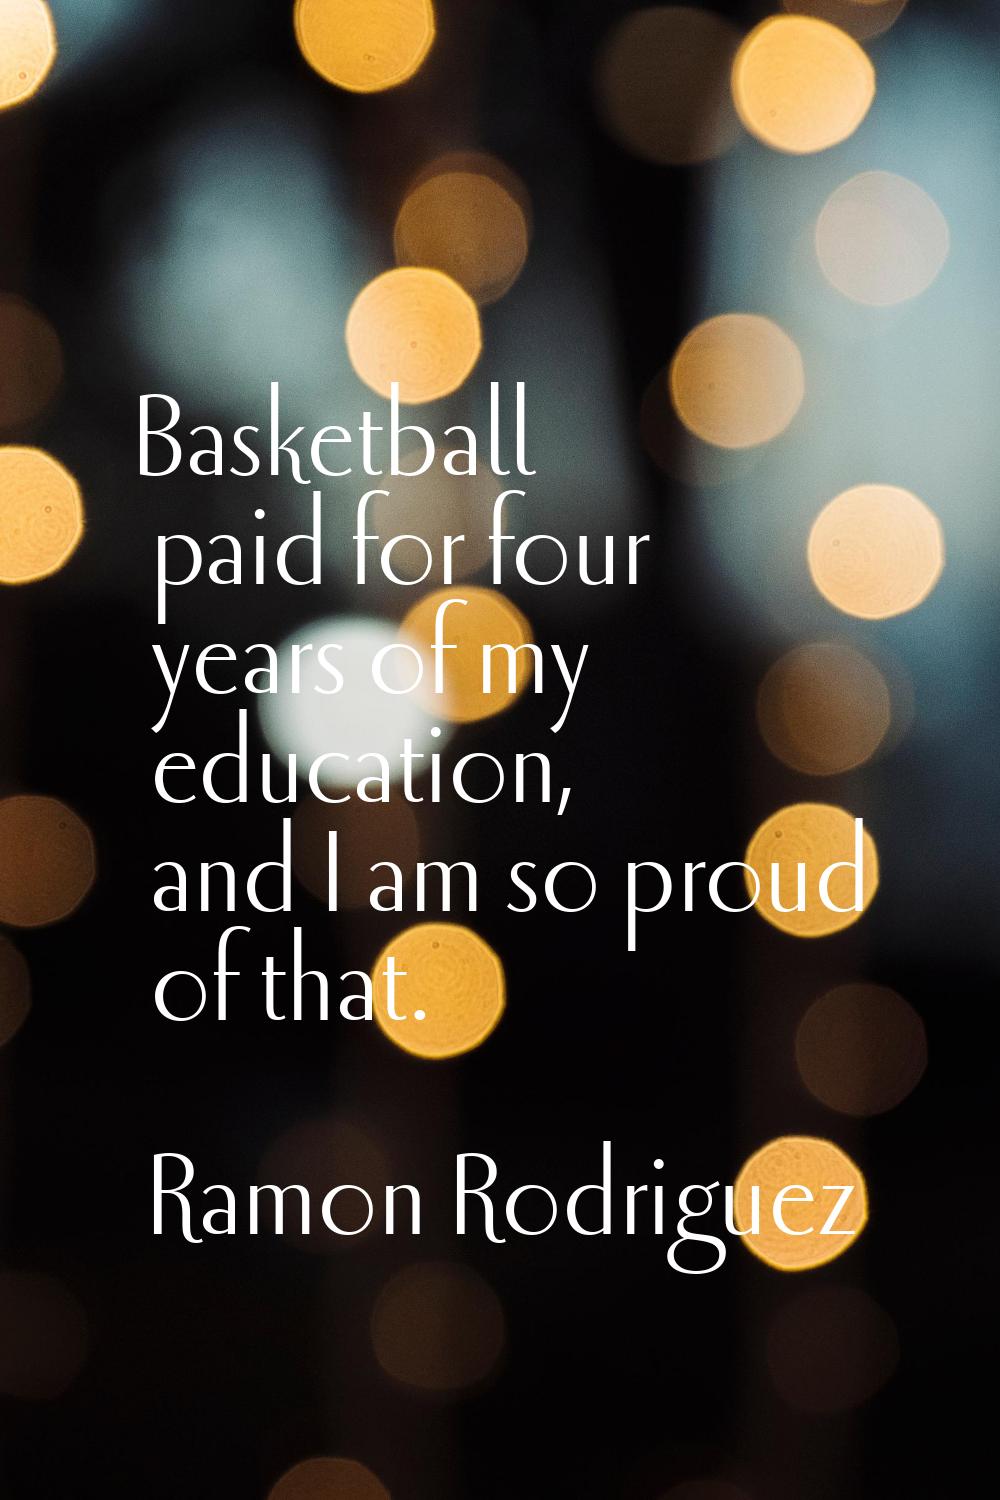 Basketball paid for four years of my education, and I am so proud of that.